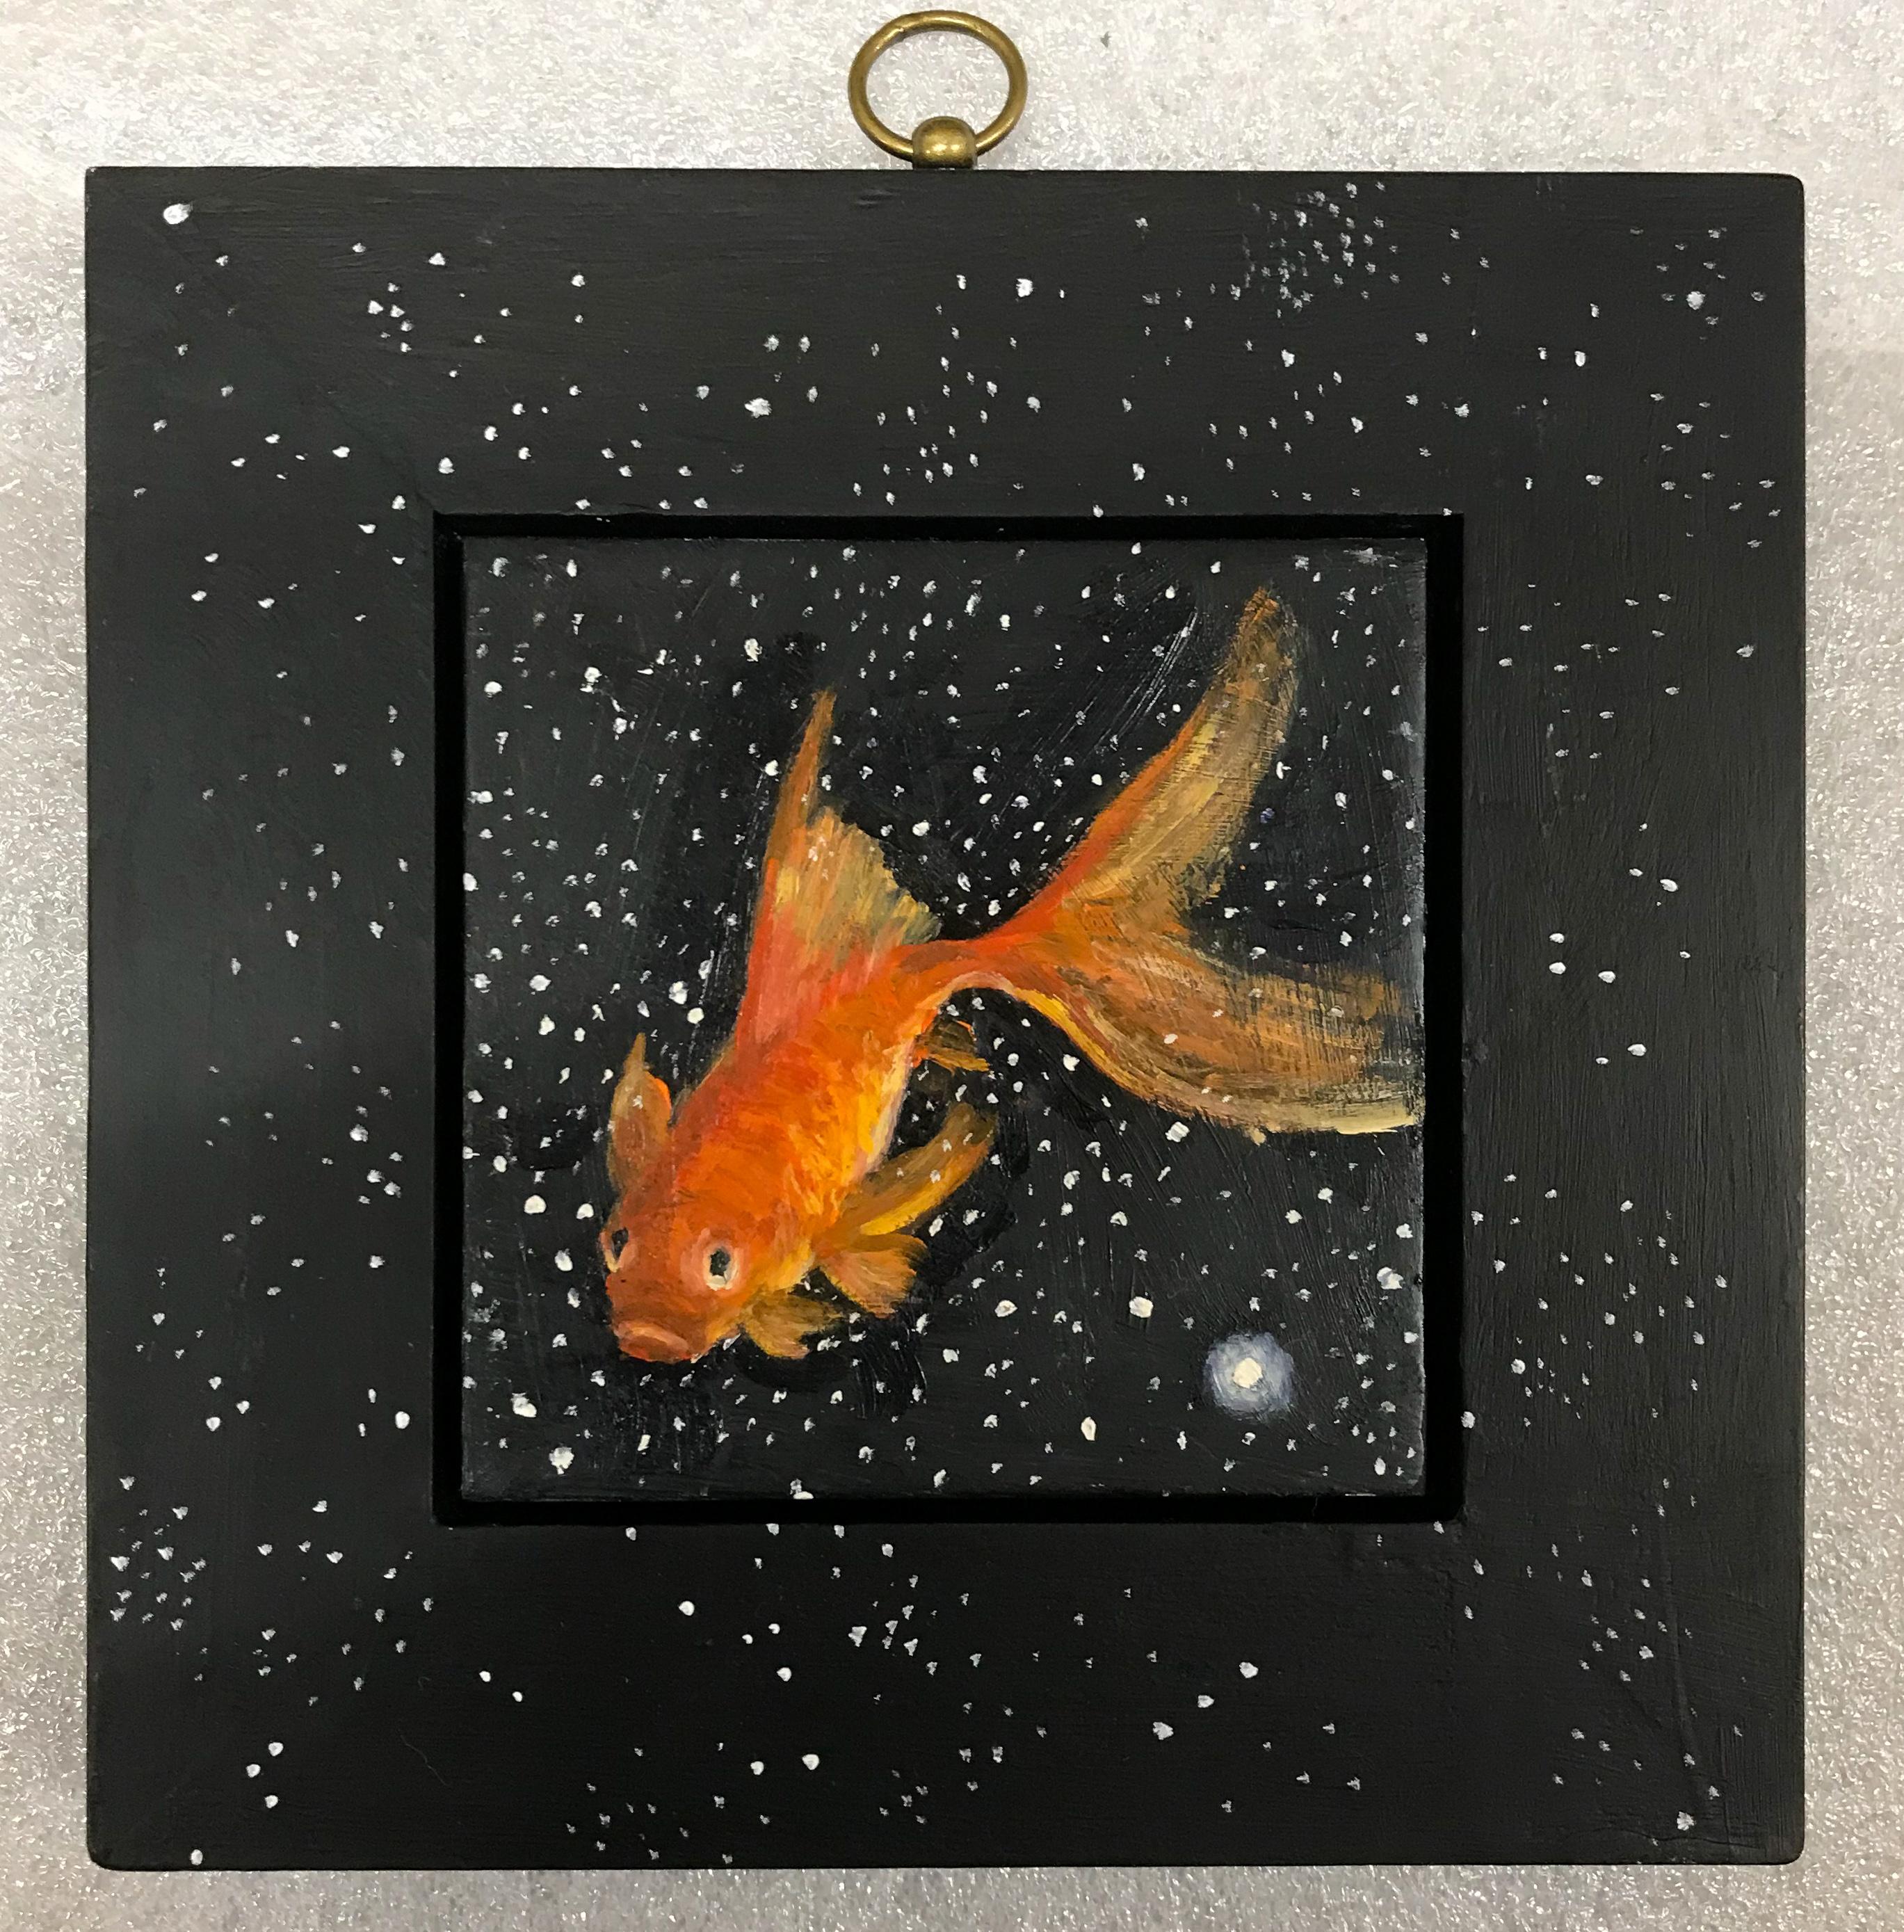 Goldfish by starlight III - Painting by Julie Fleming-Williams